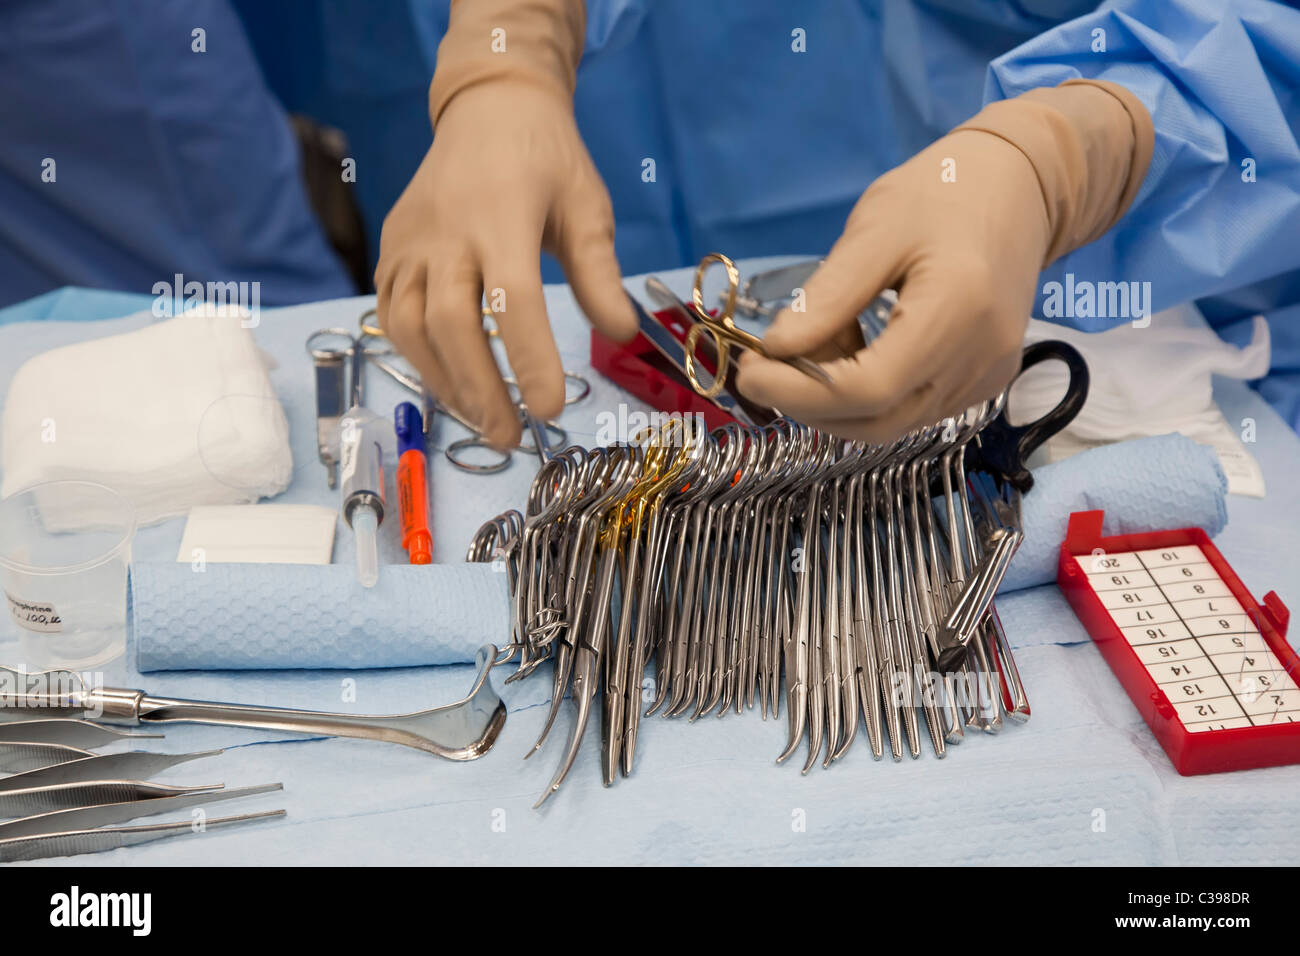 Detroit, Michigan - A nurse handles surgical tools in an operating room at St. John Hospital. Stock Photo